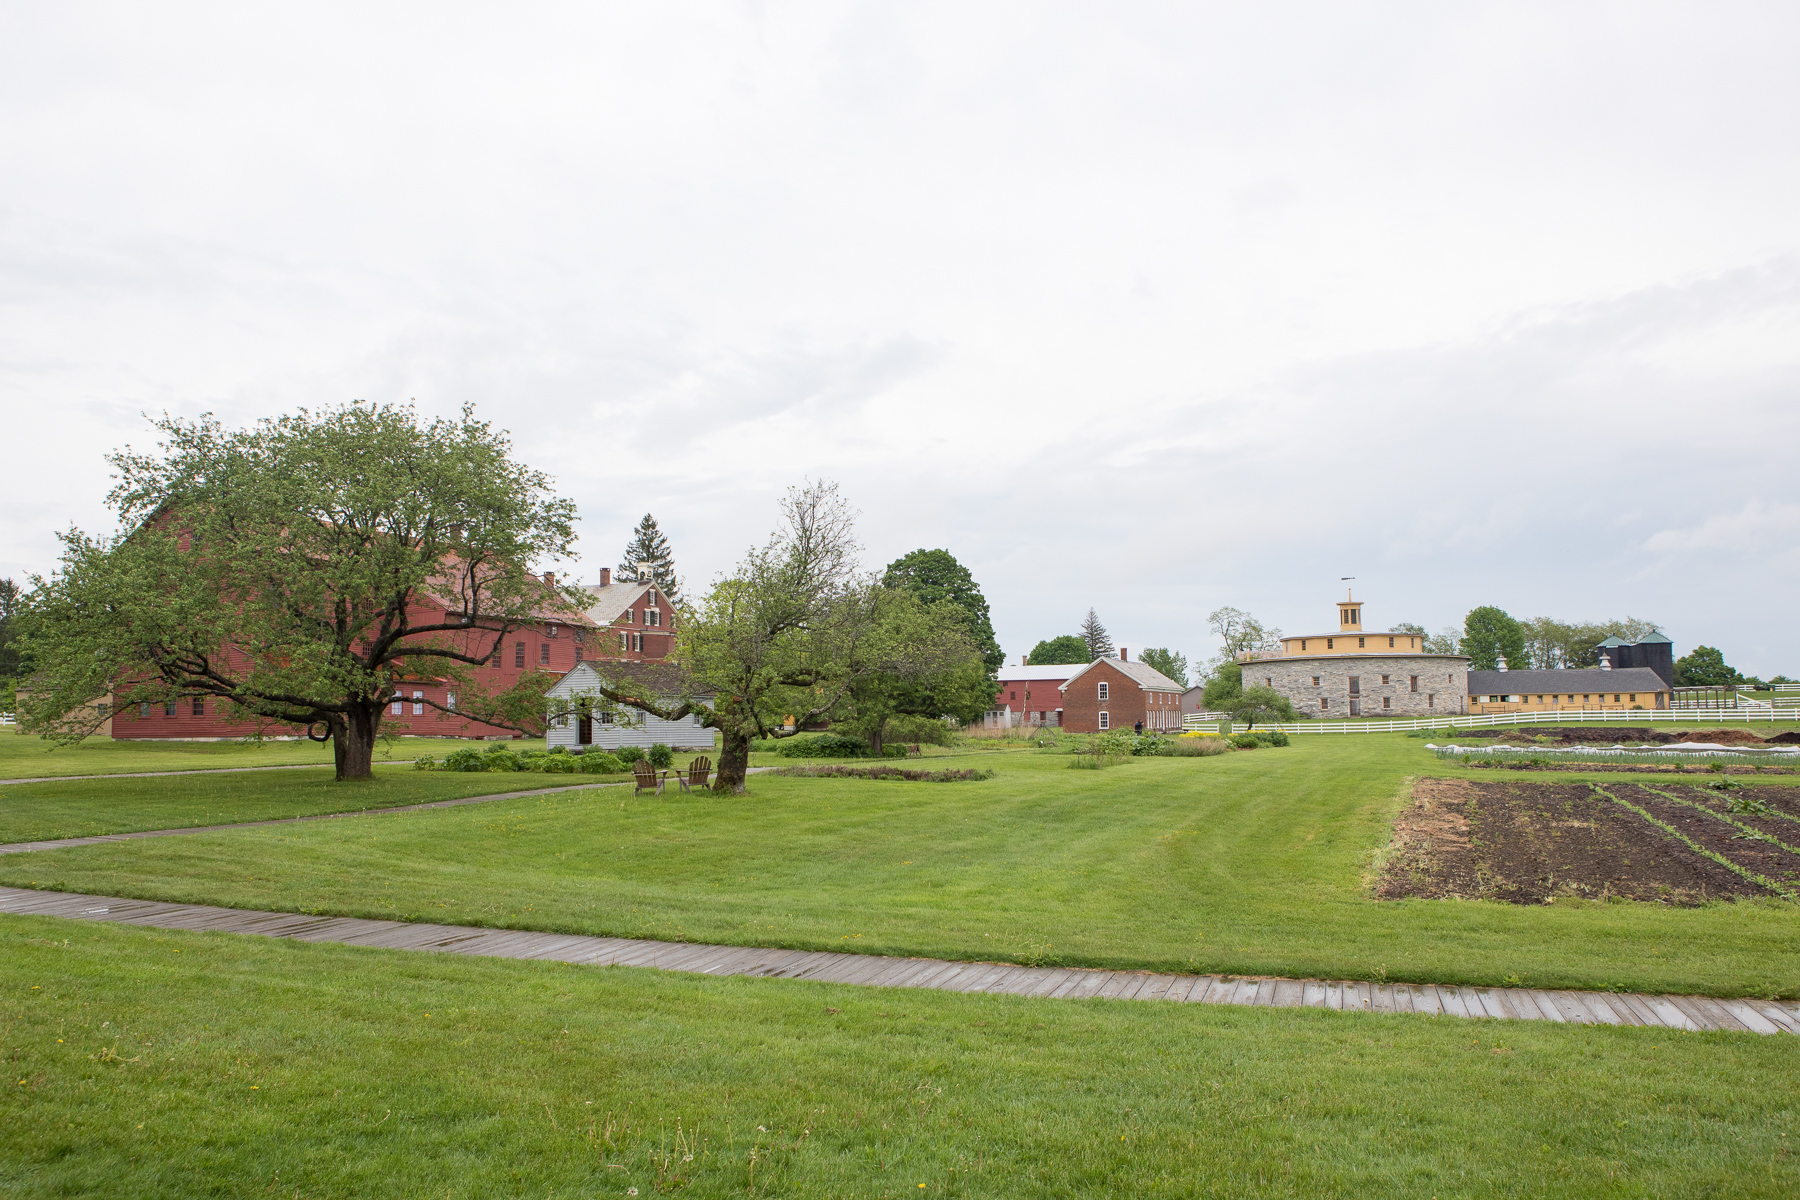 The historic and rustic setting of Hancock Shaker Village as the backdrop for the wedding.